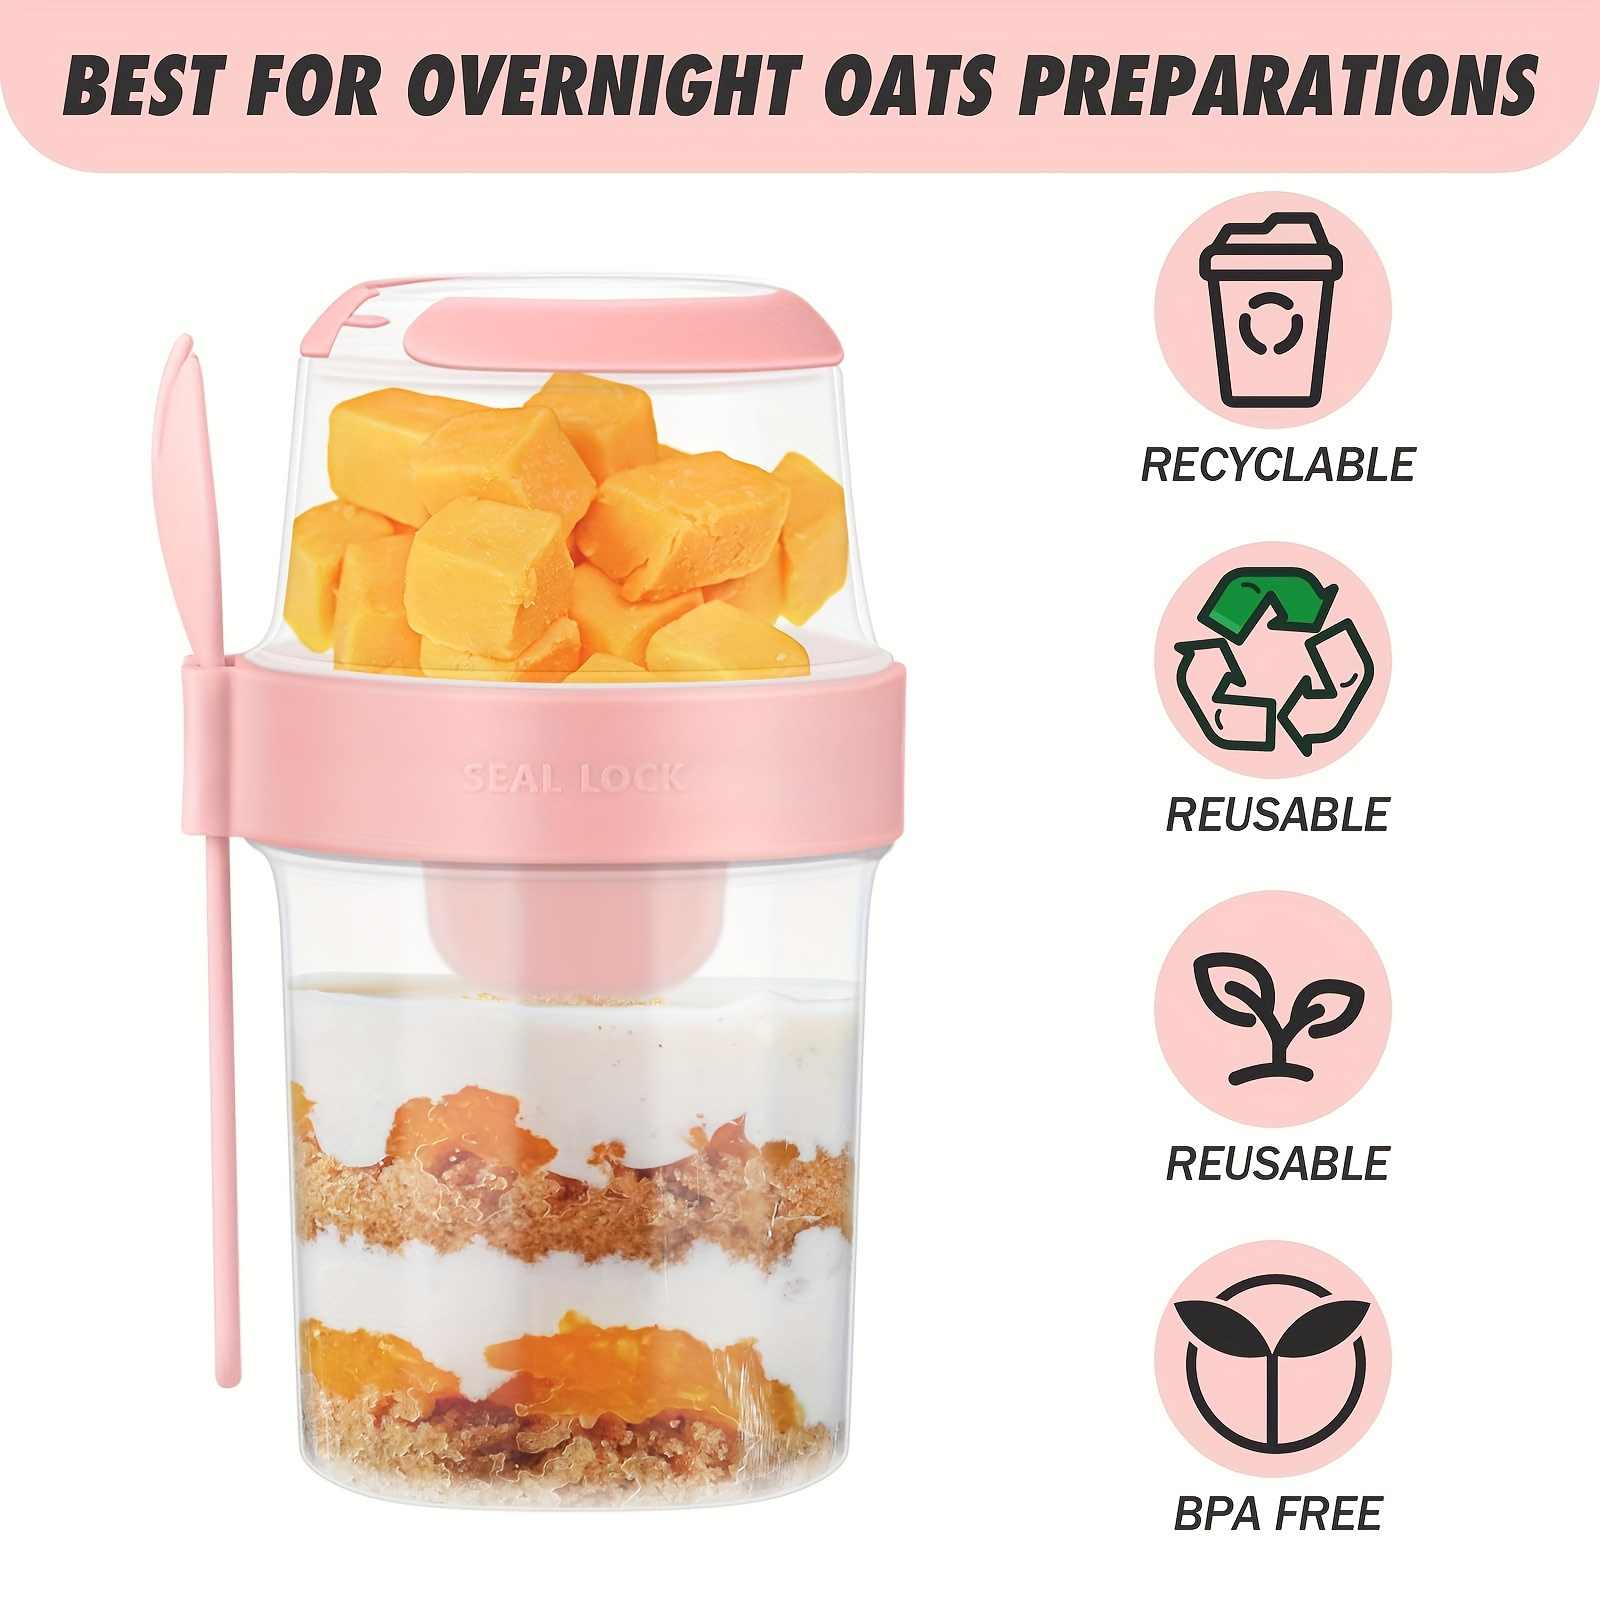 

2pcs, 2-tier Overnight Oats Containers With Lids And Spoons, 870ml Overnight Oats Jar, To Go Salad Cup, For Yogurt, Oats, Salad And More, Home Kitchen Items, Travel Accessories